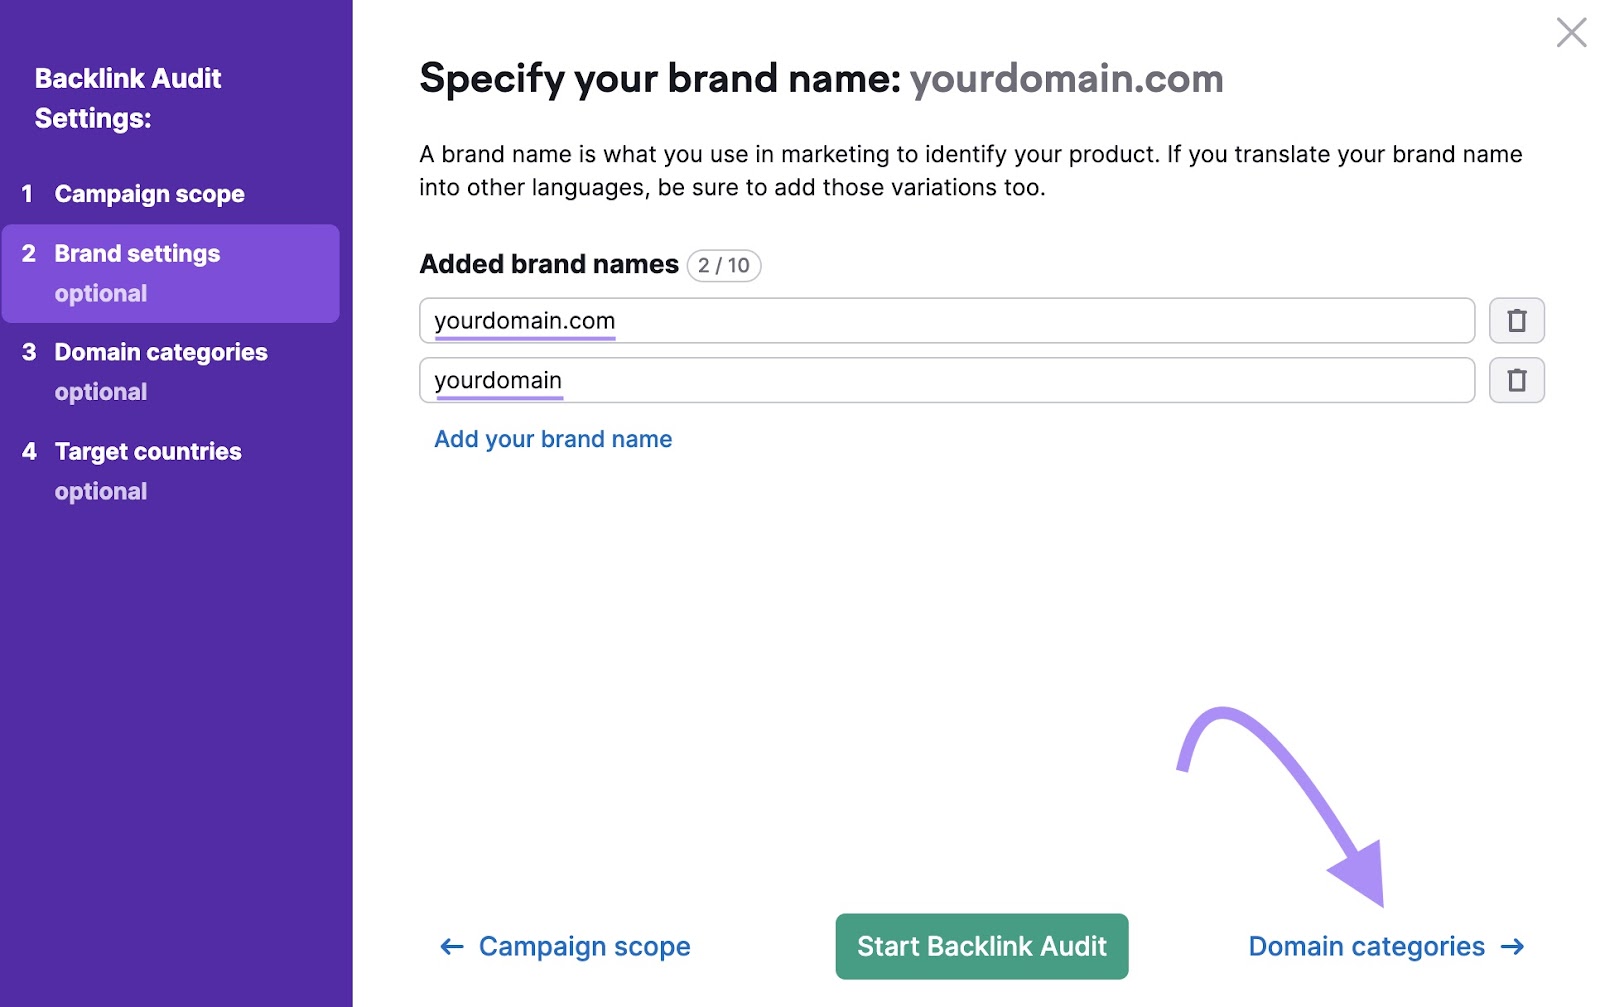 "Specify your brand name" window in Backlink Audit settings